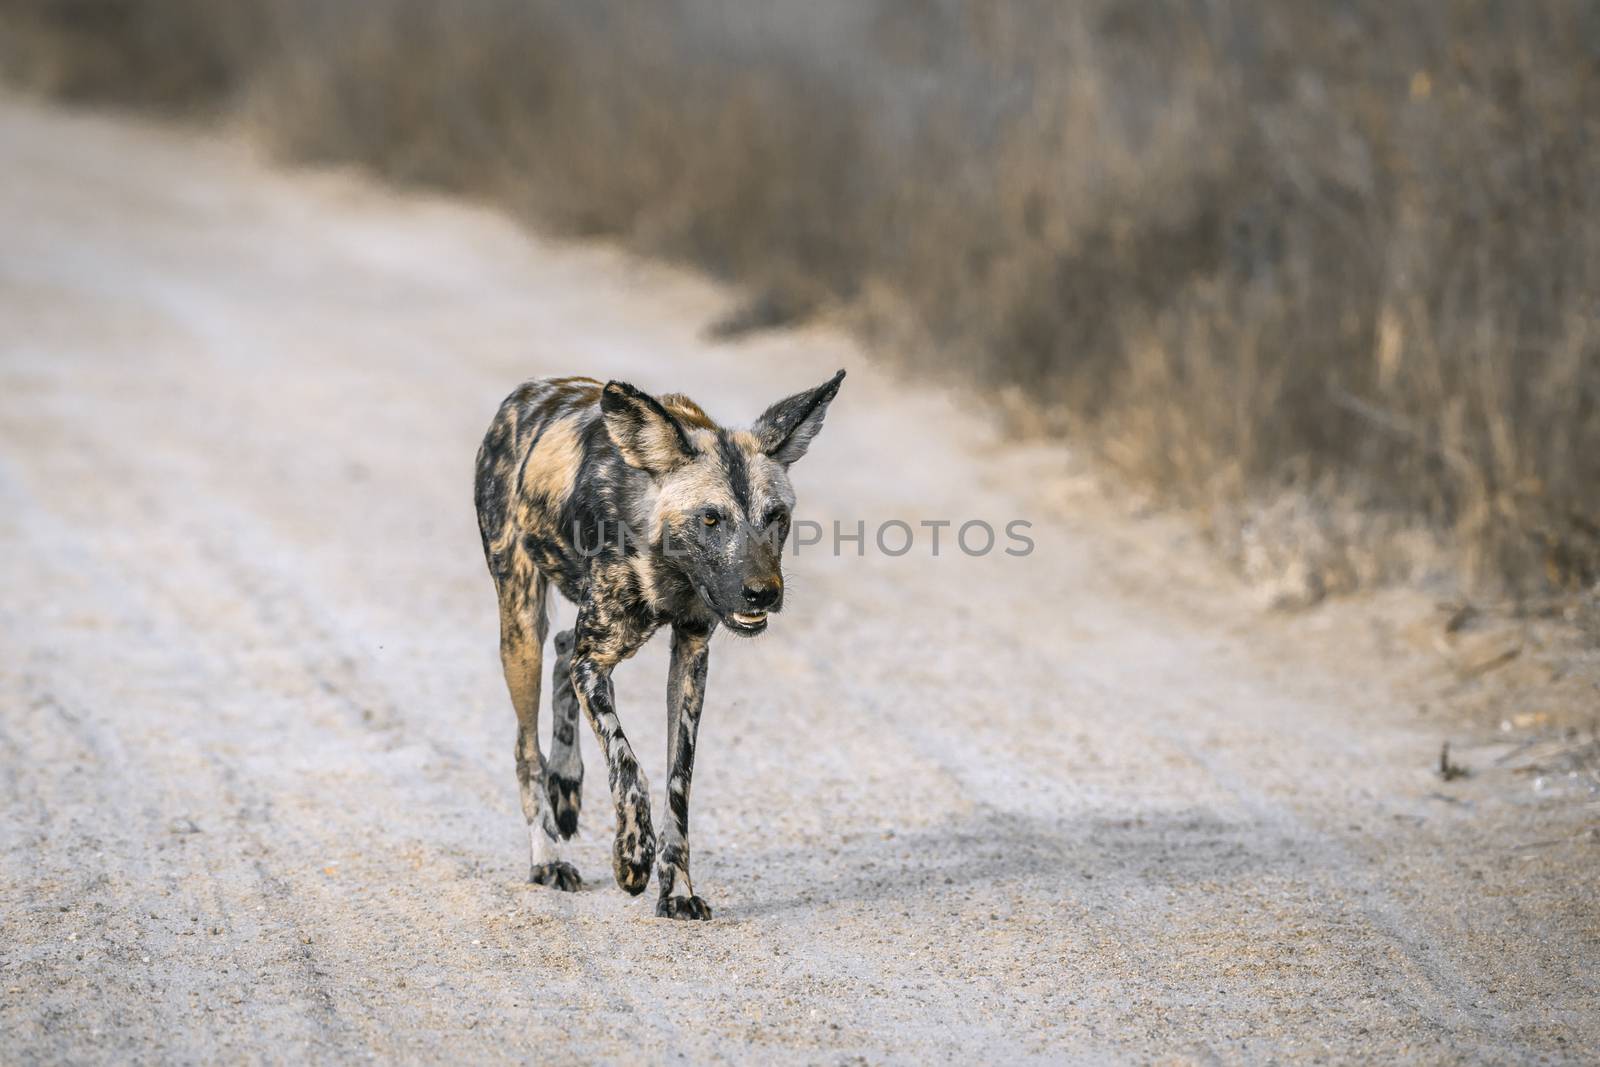 African wild dog moving on gravel road in Kruger National park, South Africa ; Specie Lycaon pictus family of Canidae